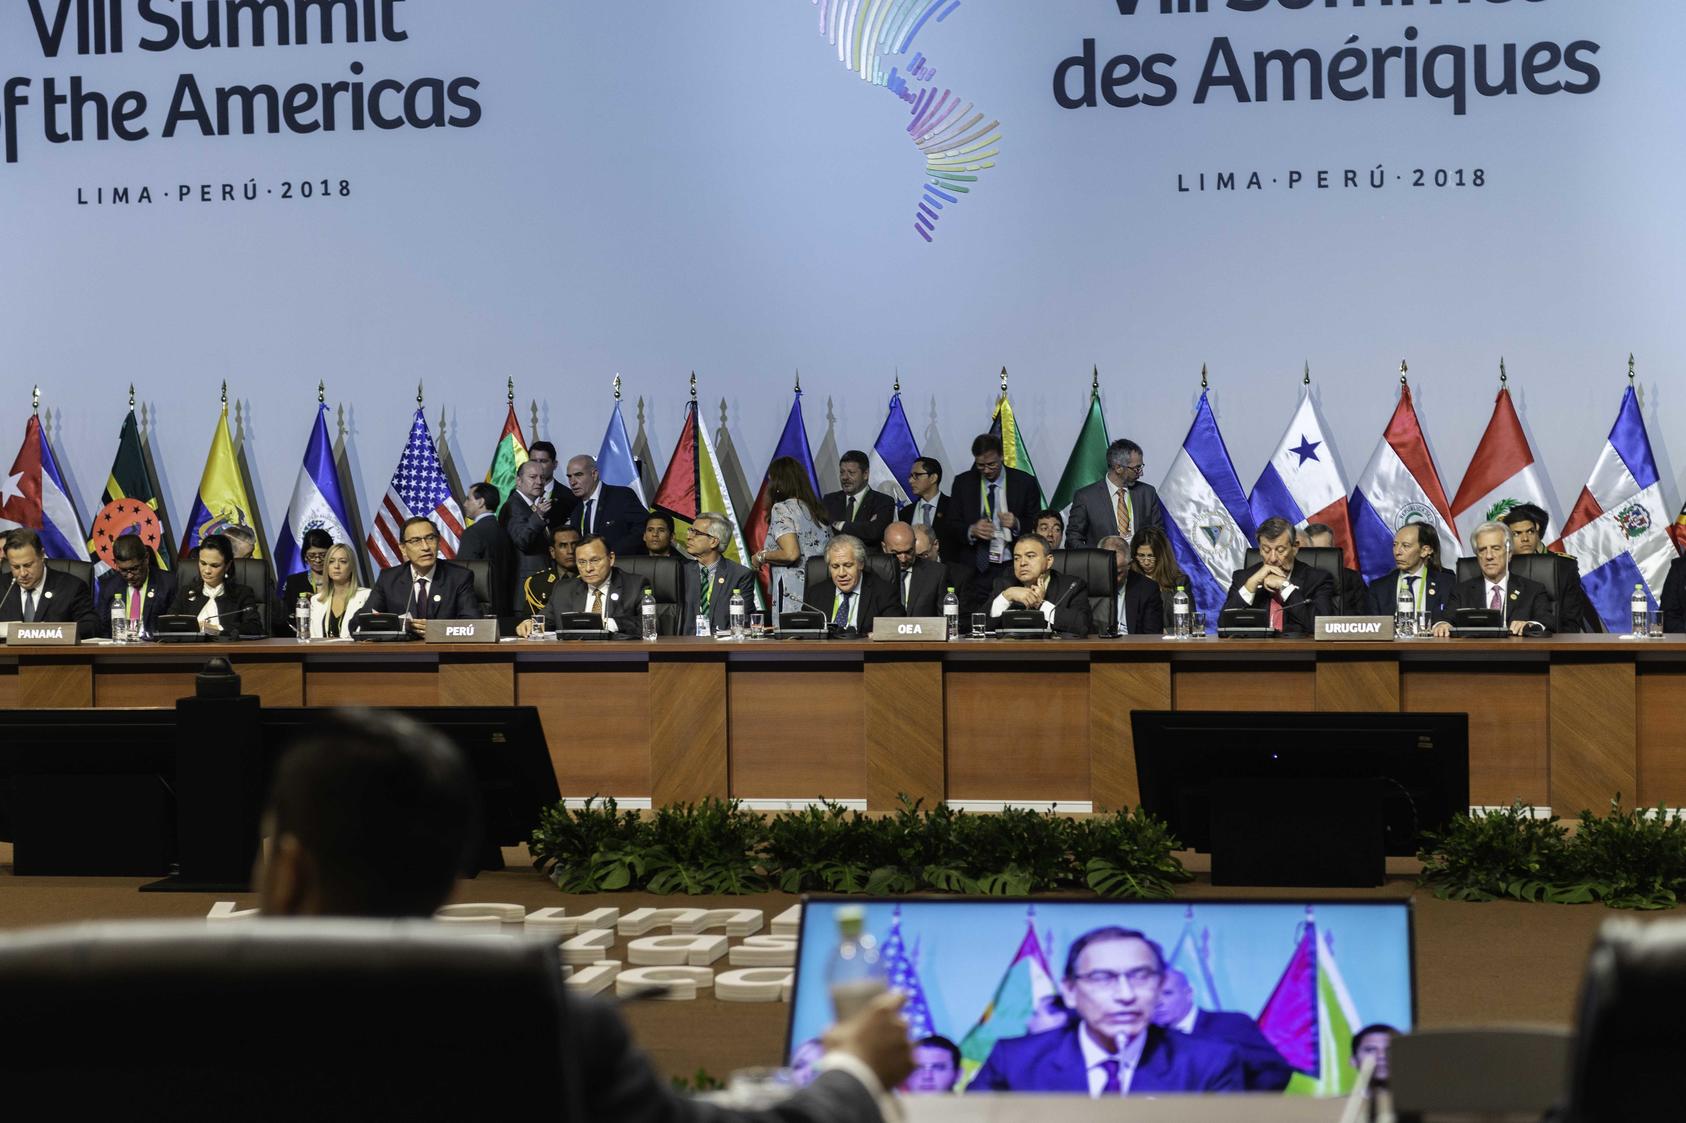 A plenary session of the 2018 Summit of the Americas in Lima, Peru. ( Juan Manuel Herrera/Organization of American States)